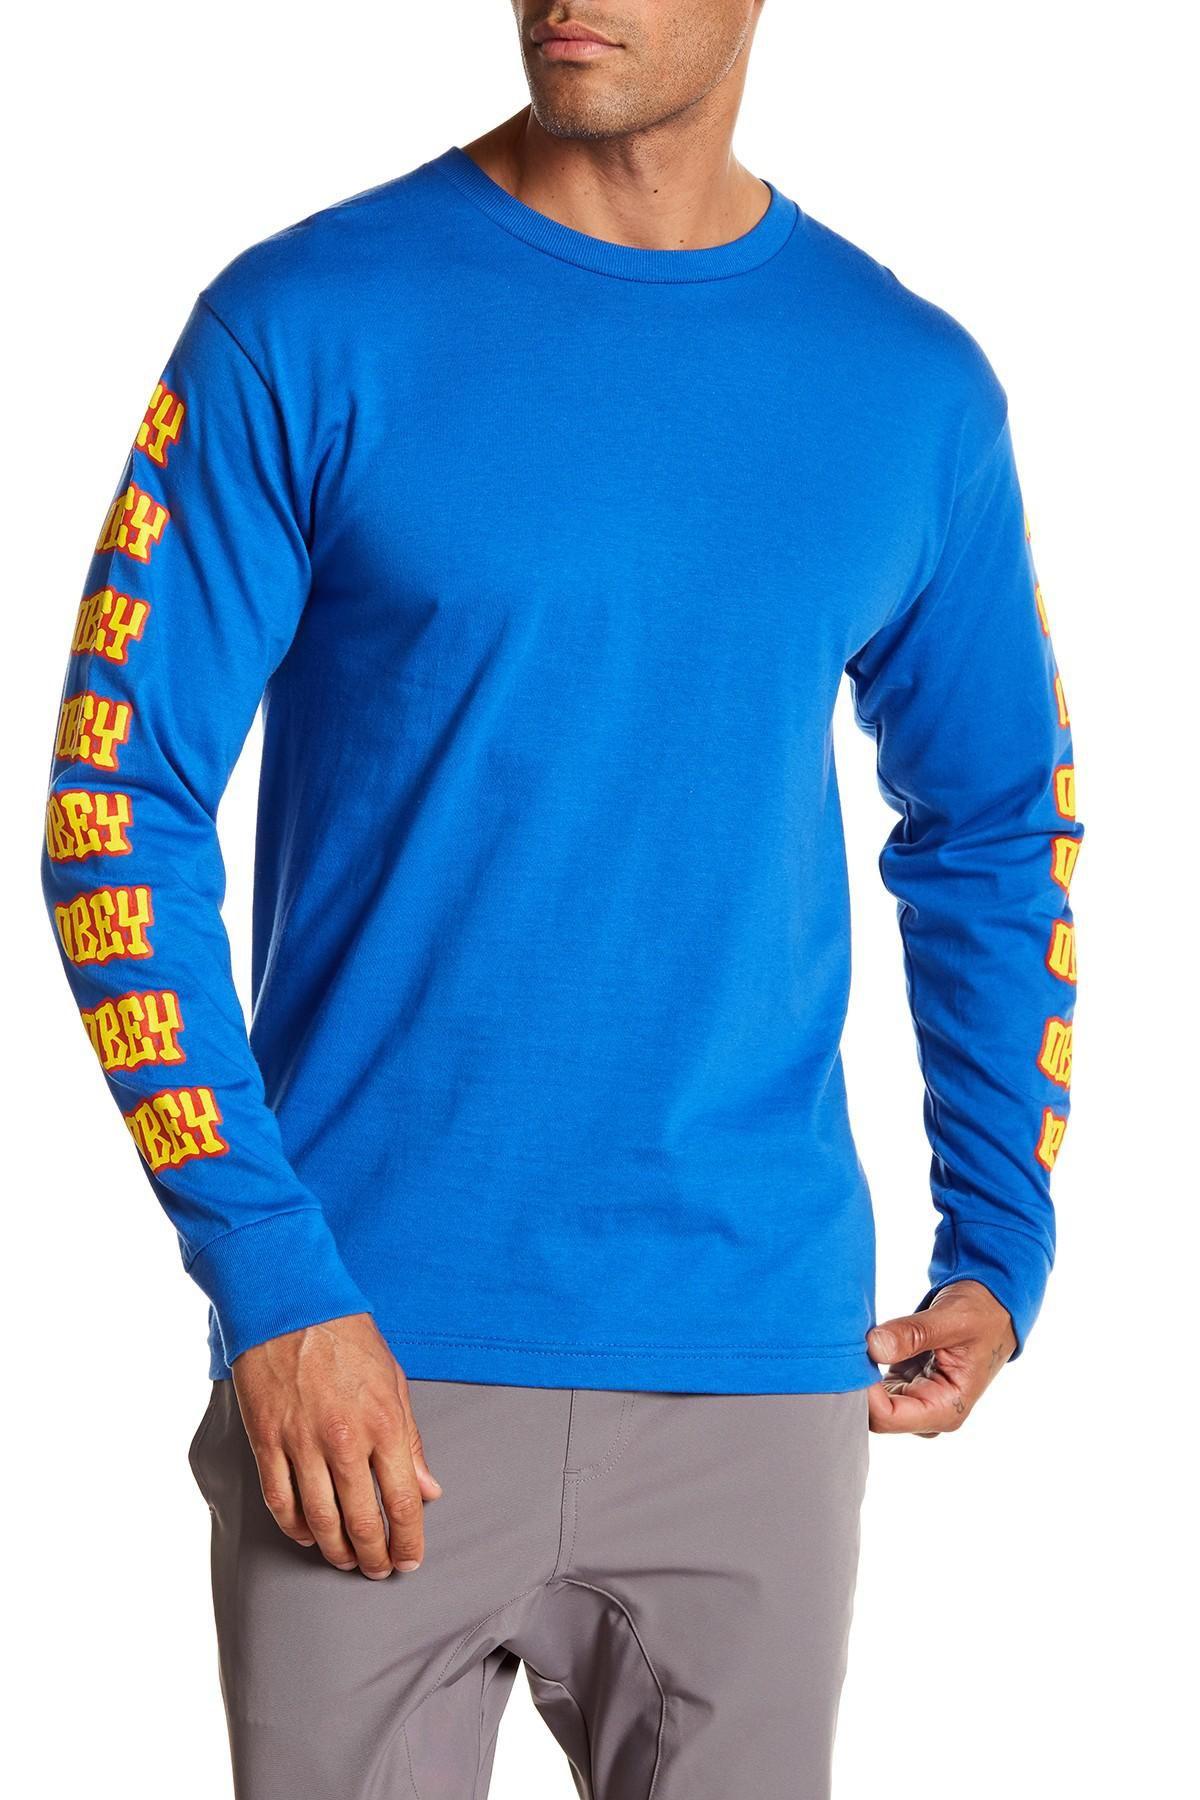 Blue Obey Logo - Obey Better Days Graphic Logo Sweater in Blue for Men - Lyst